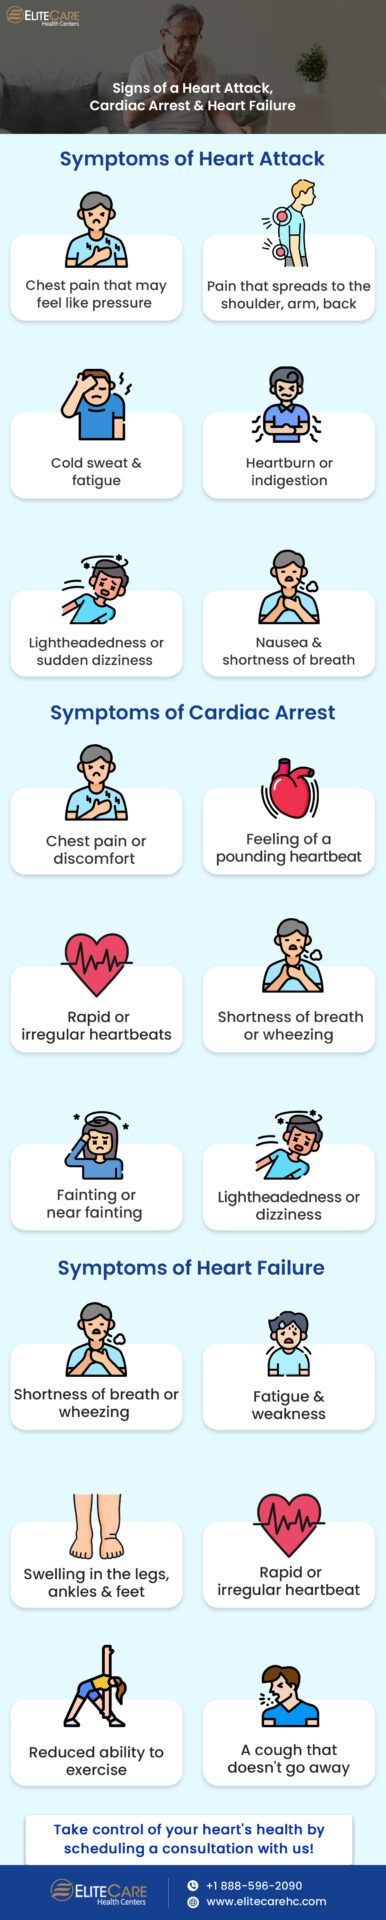 A Senior’s Guide to Heart Attack, Cardiac Arrest, and Heart Failure | Infographic